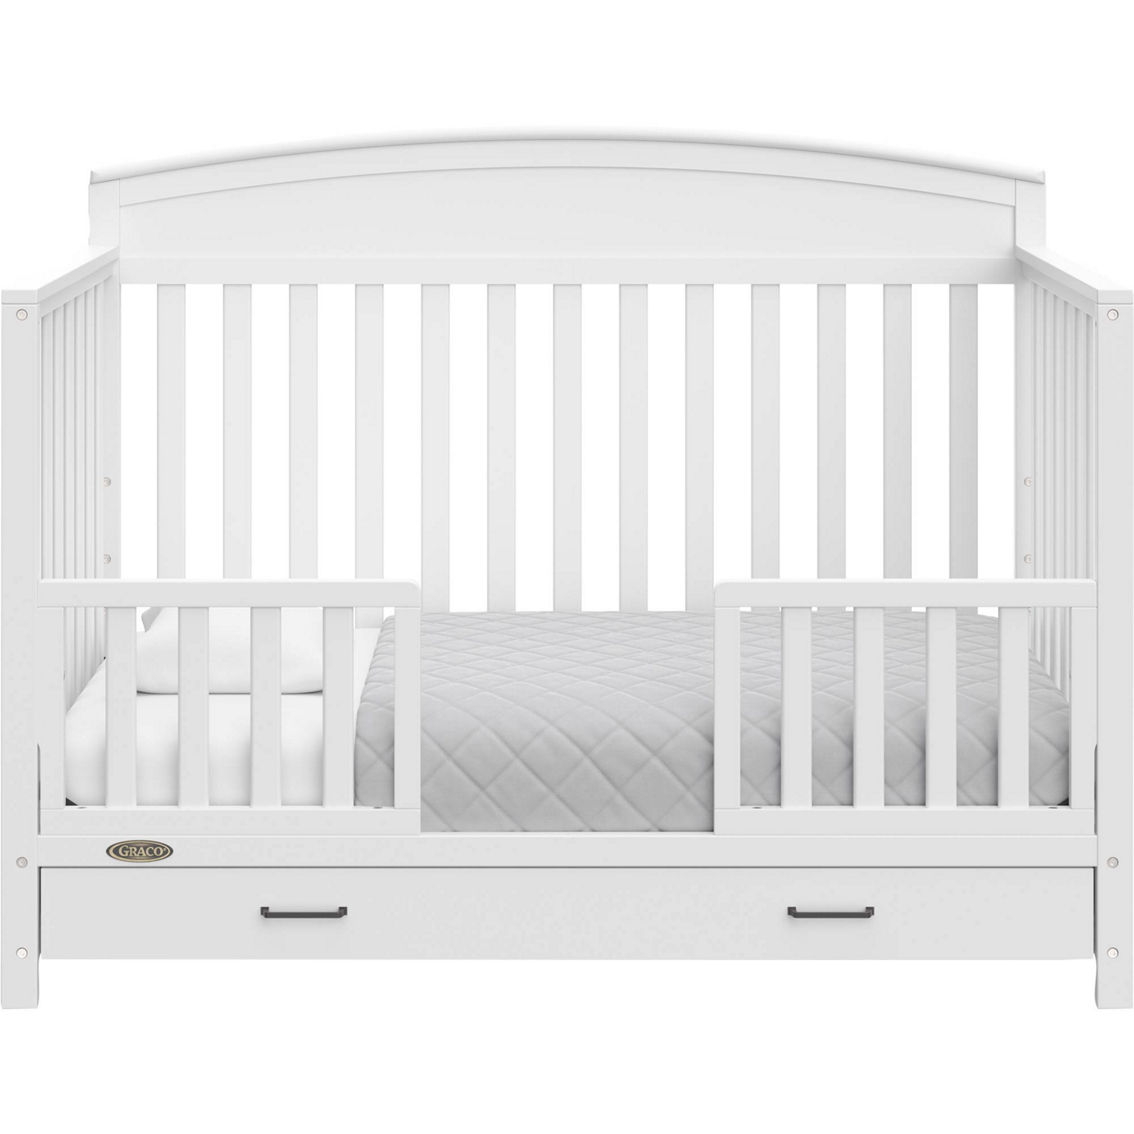 Graco Benton 5 in 1 Convertible Crib with Drawer - Image 4 of 7